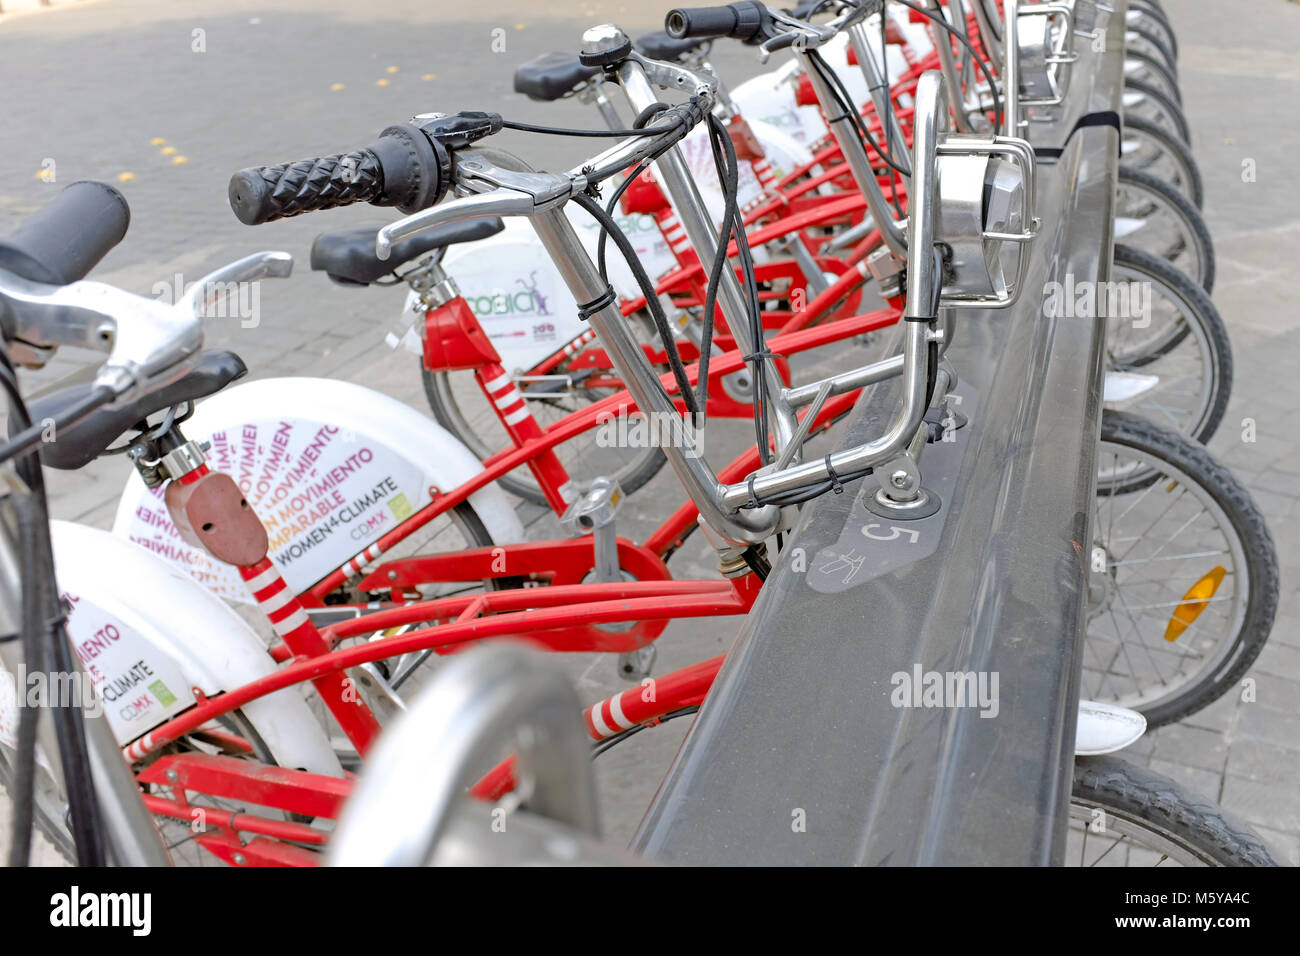 Launched in 2010 in Mexico City, Mexico, the private-public partnership for sustainable transport via the EcoBici bike sharing program expands. Stock Photo